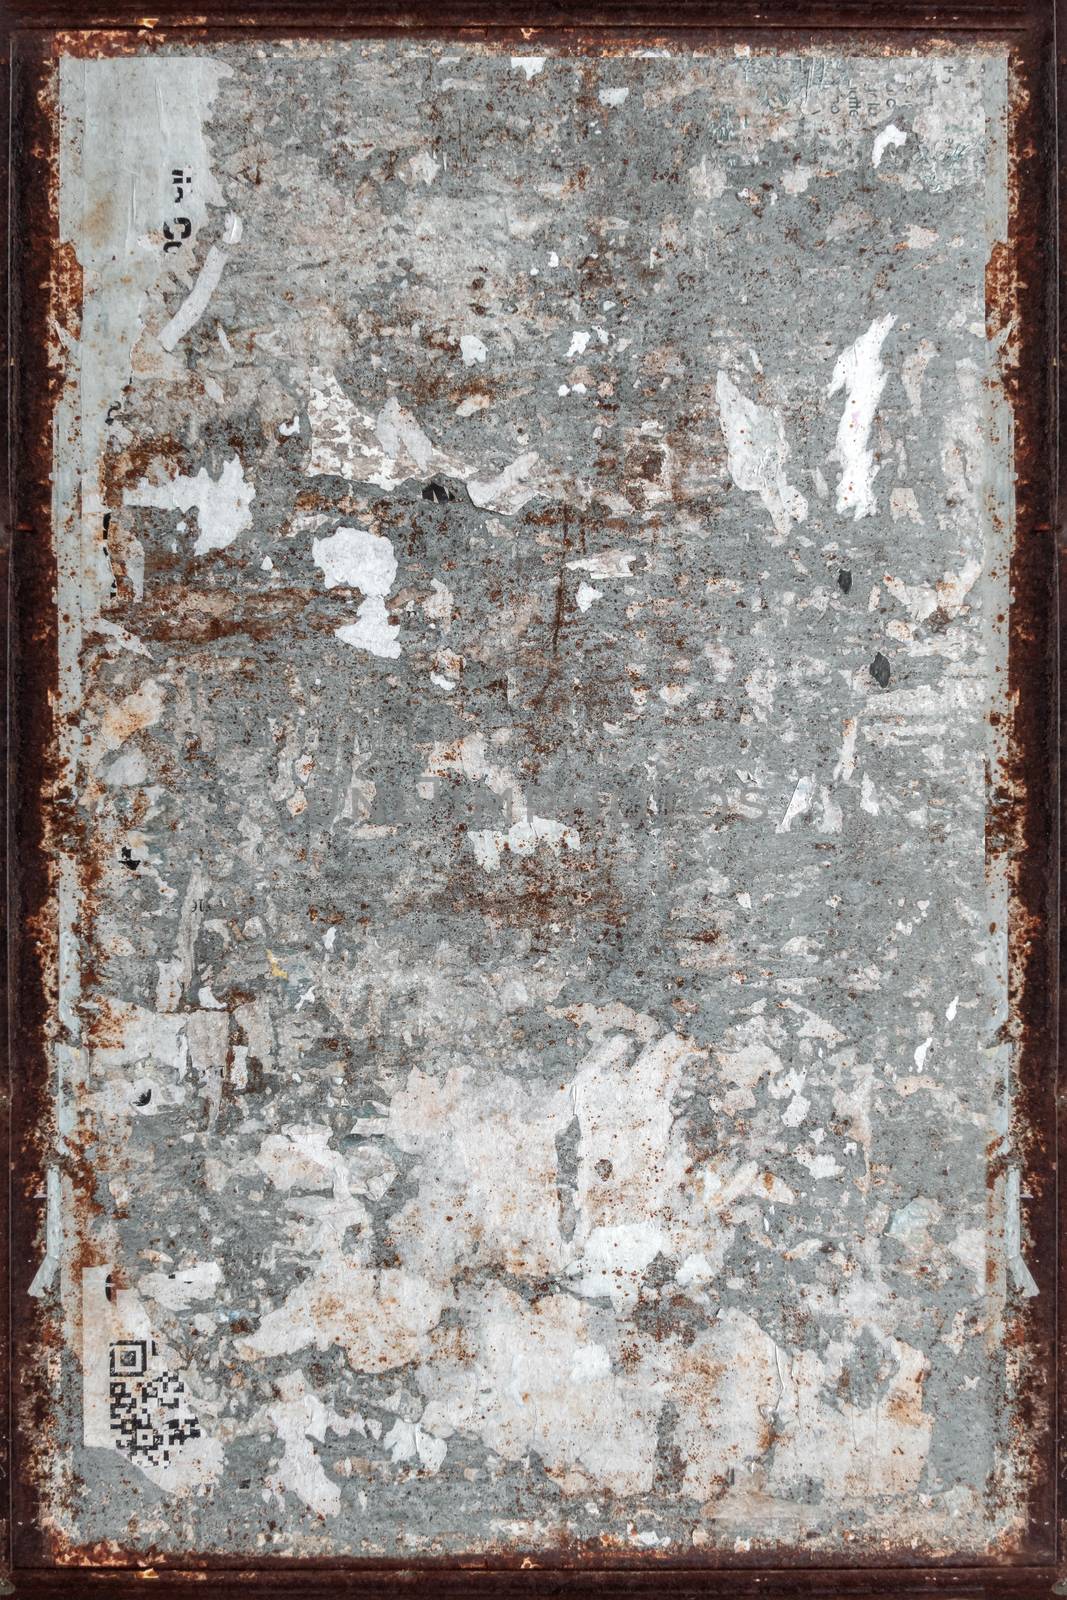 Texture of a grungy wall with torn posters and rusty frame. Ideal for textures and backgrounds. Retro style.